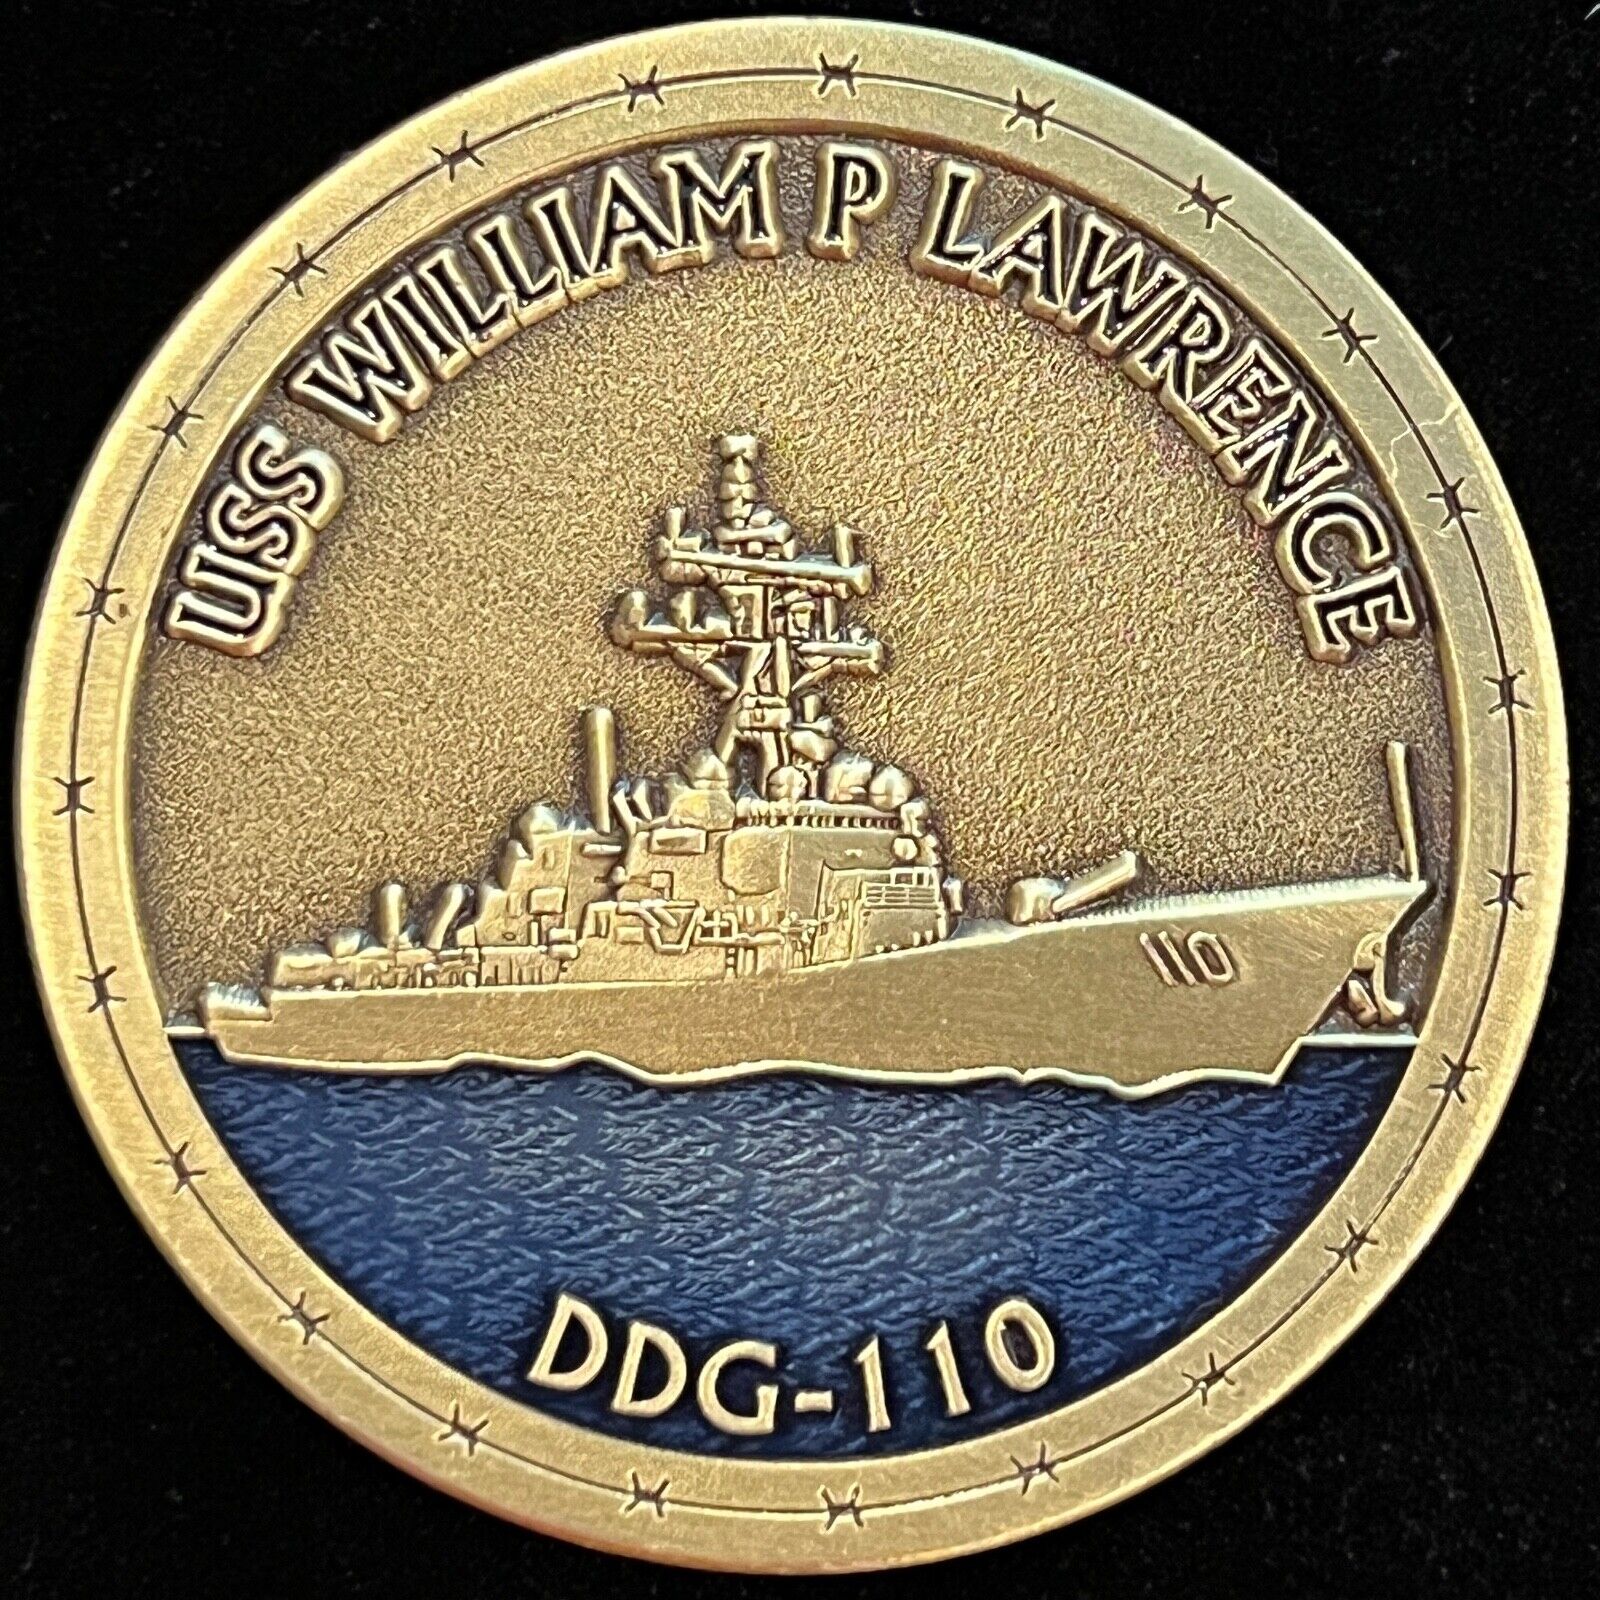 USS William P Lawrence DDG 110 Never Give Up Navy Challenge Coin